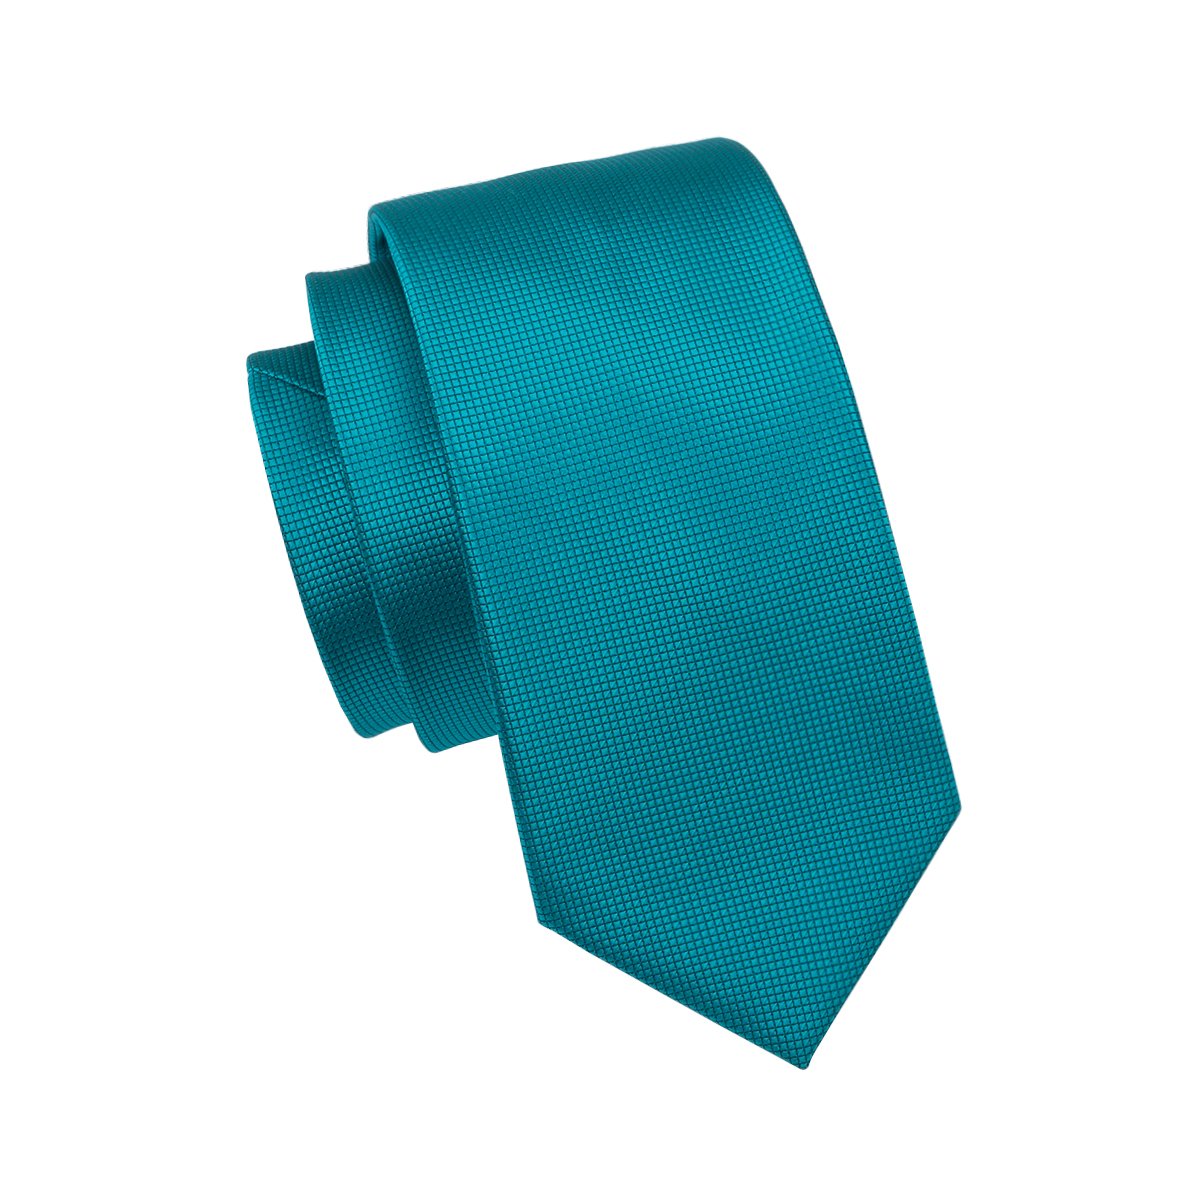 Teal Blue Solid Tie Pocket Square Cufflinks Set - barry-wang